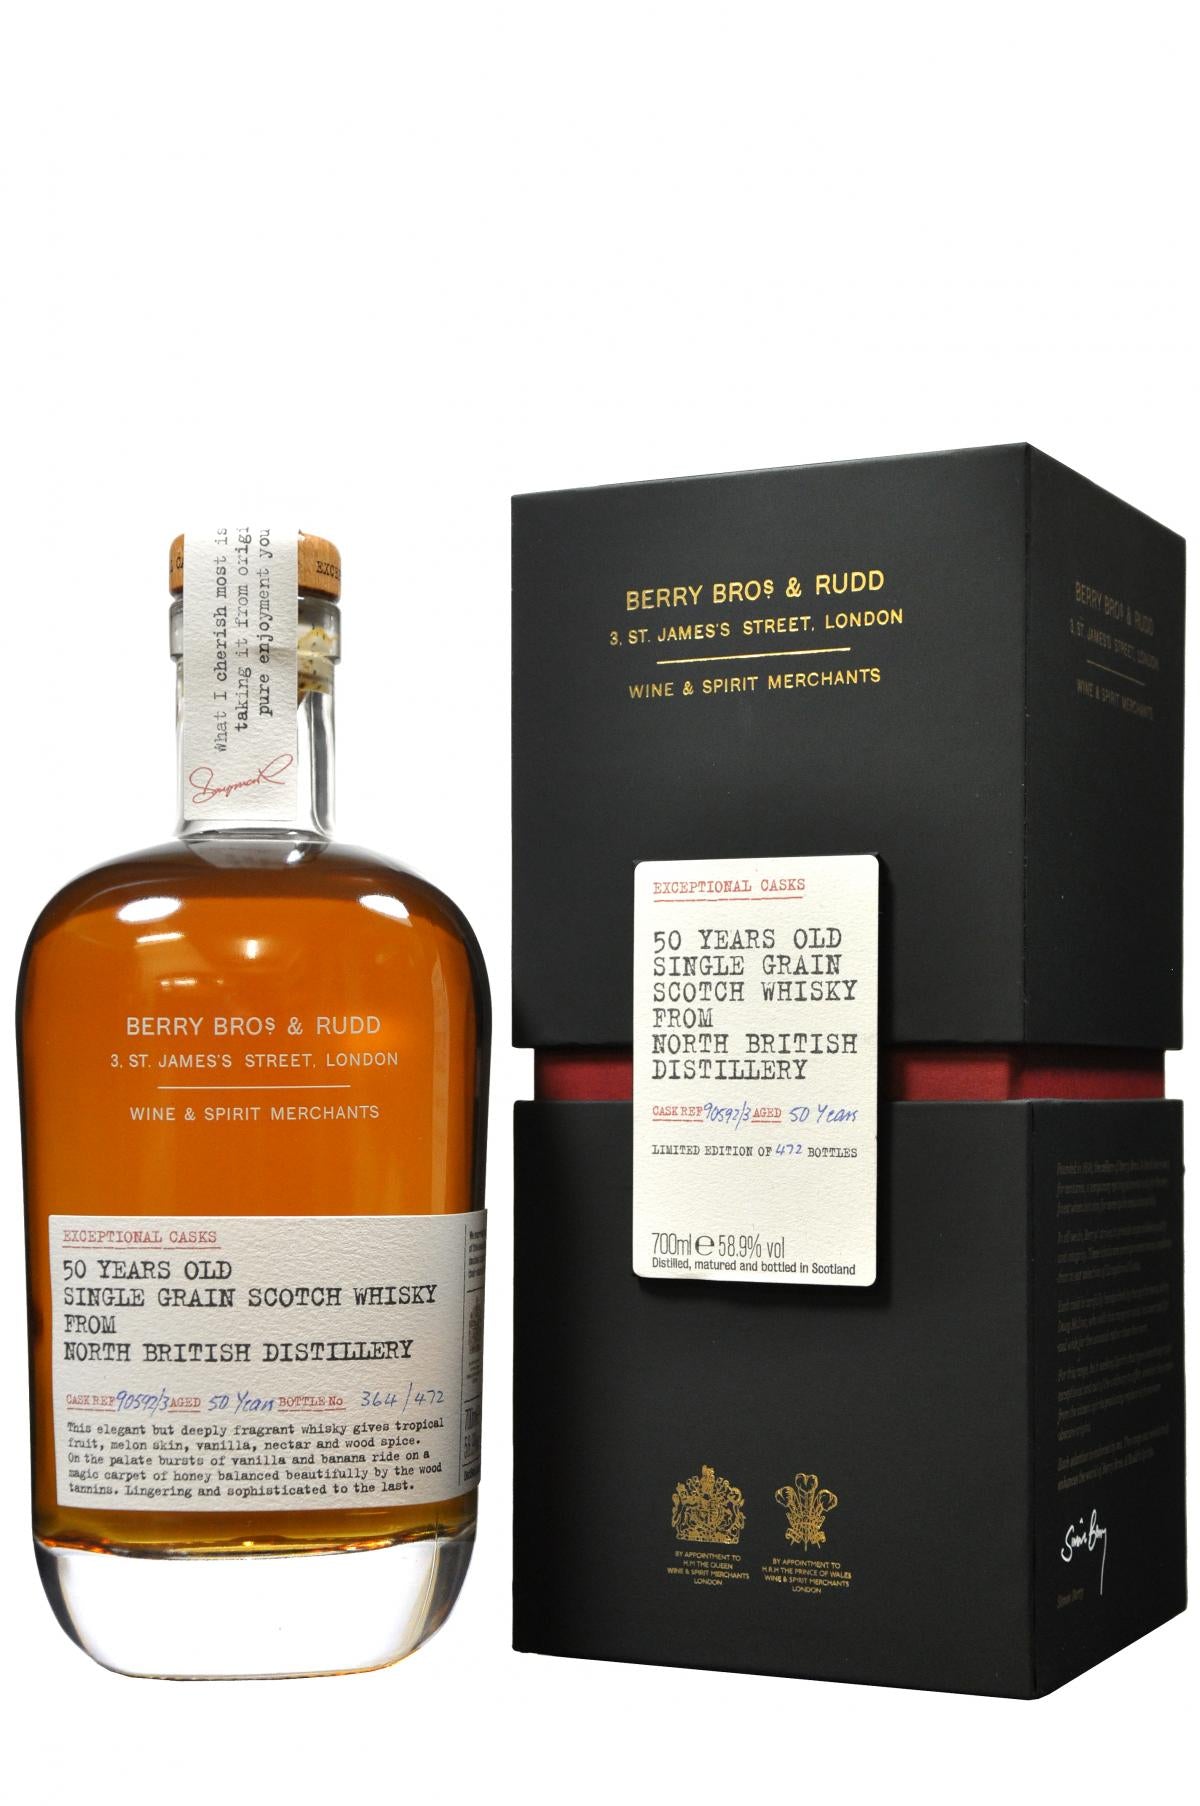 north british 50 year old, exceptional casks, berry bros & rudd, single grain scotch whisky